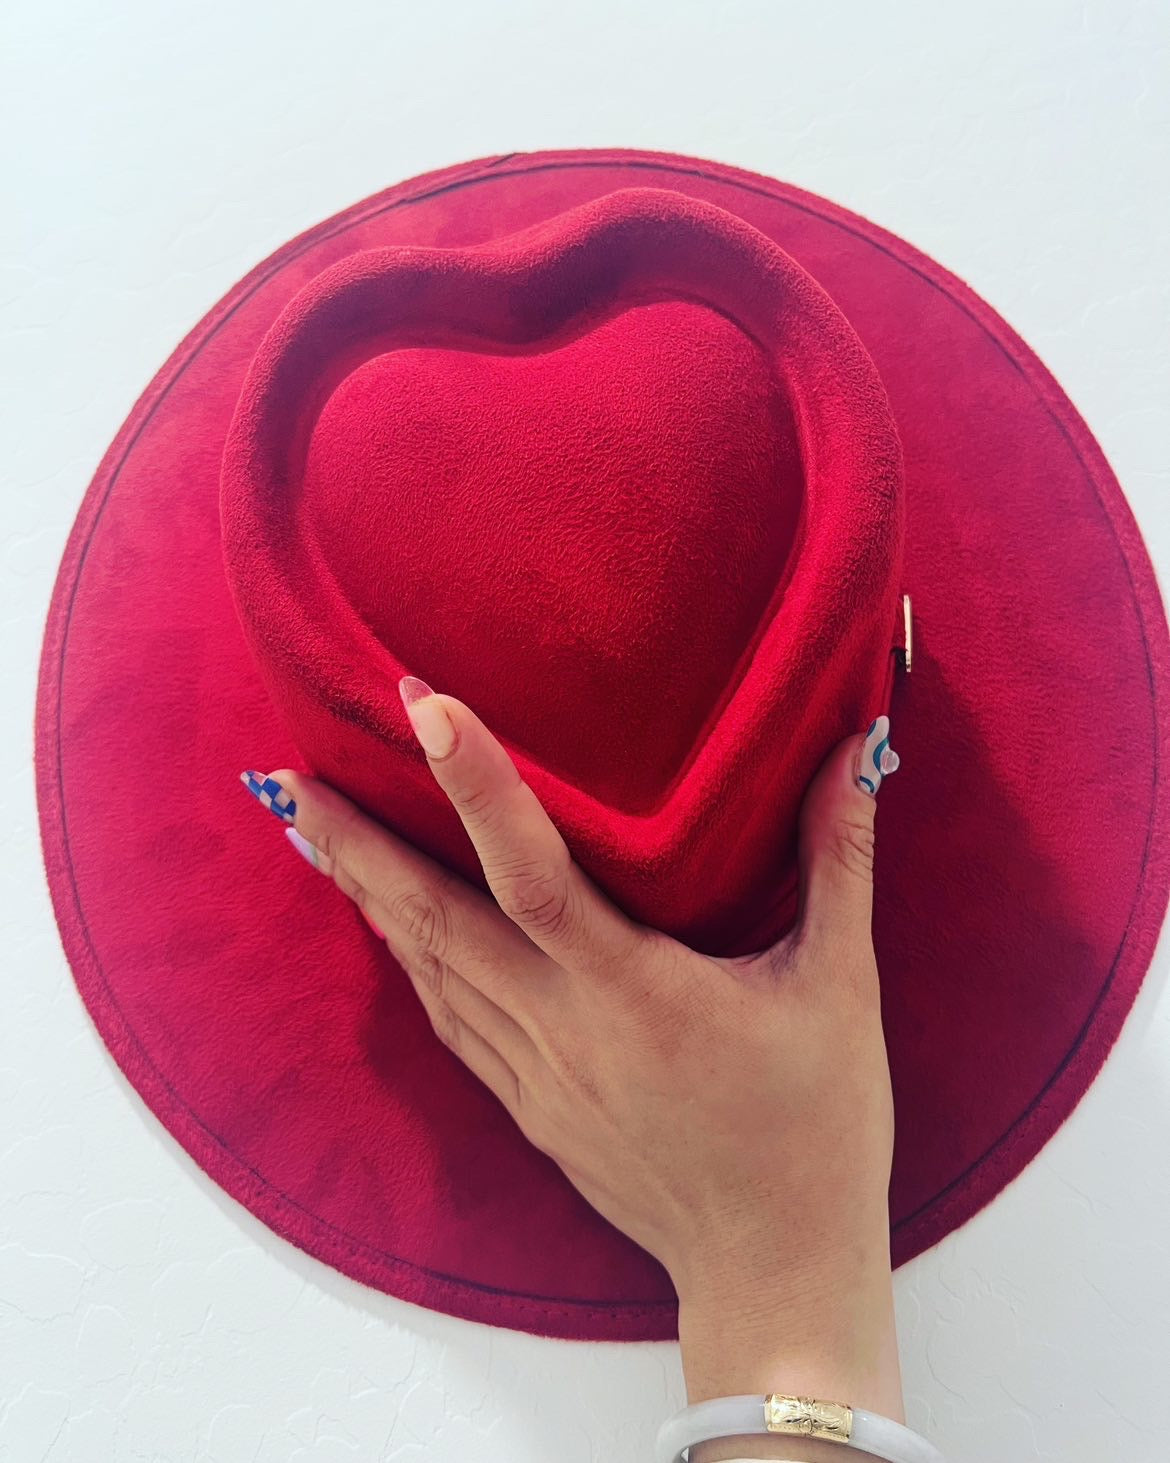 Amorcito Corazón- Heart Shaped Hats by